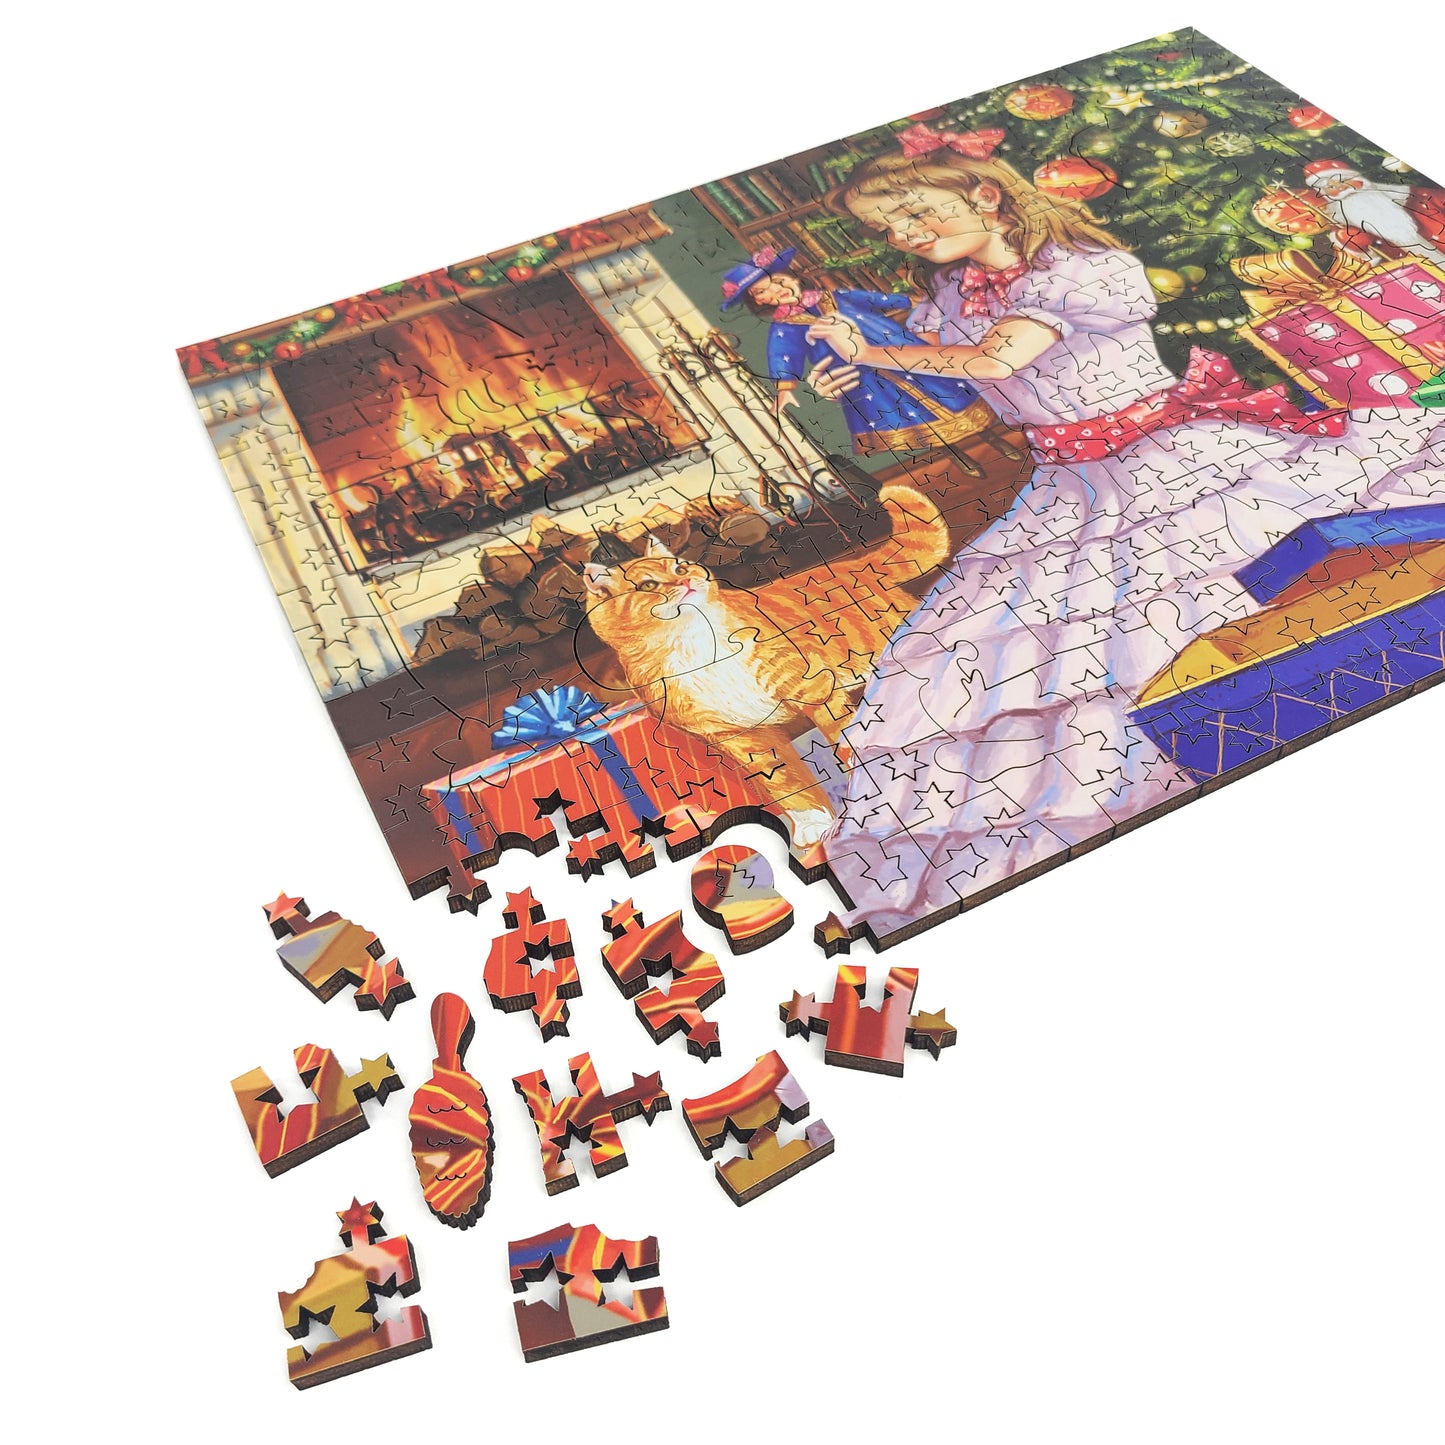 Wooden Jigsaw Puzzle with Uniquely Shaped Pieces for Adults - 235 Pieces - Christmas Gift